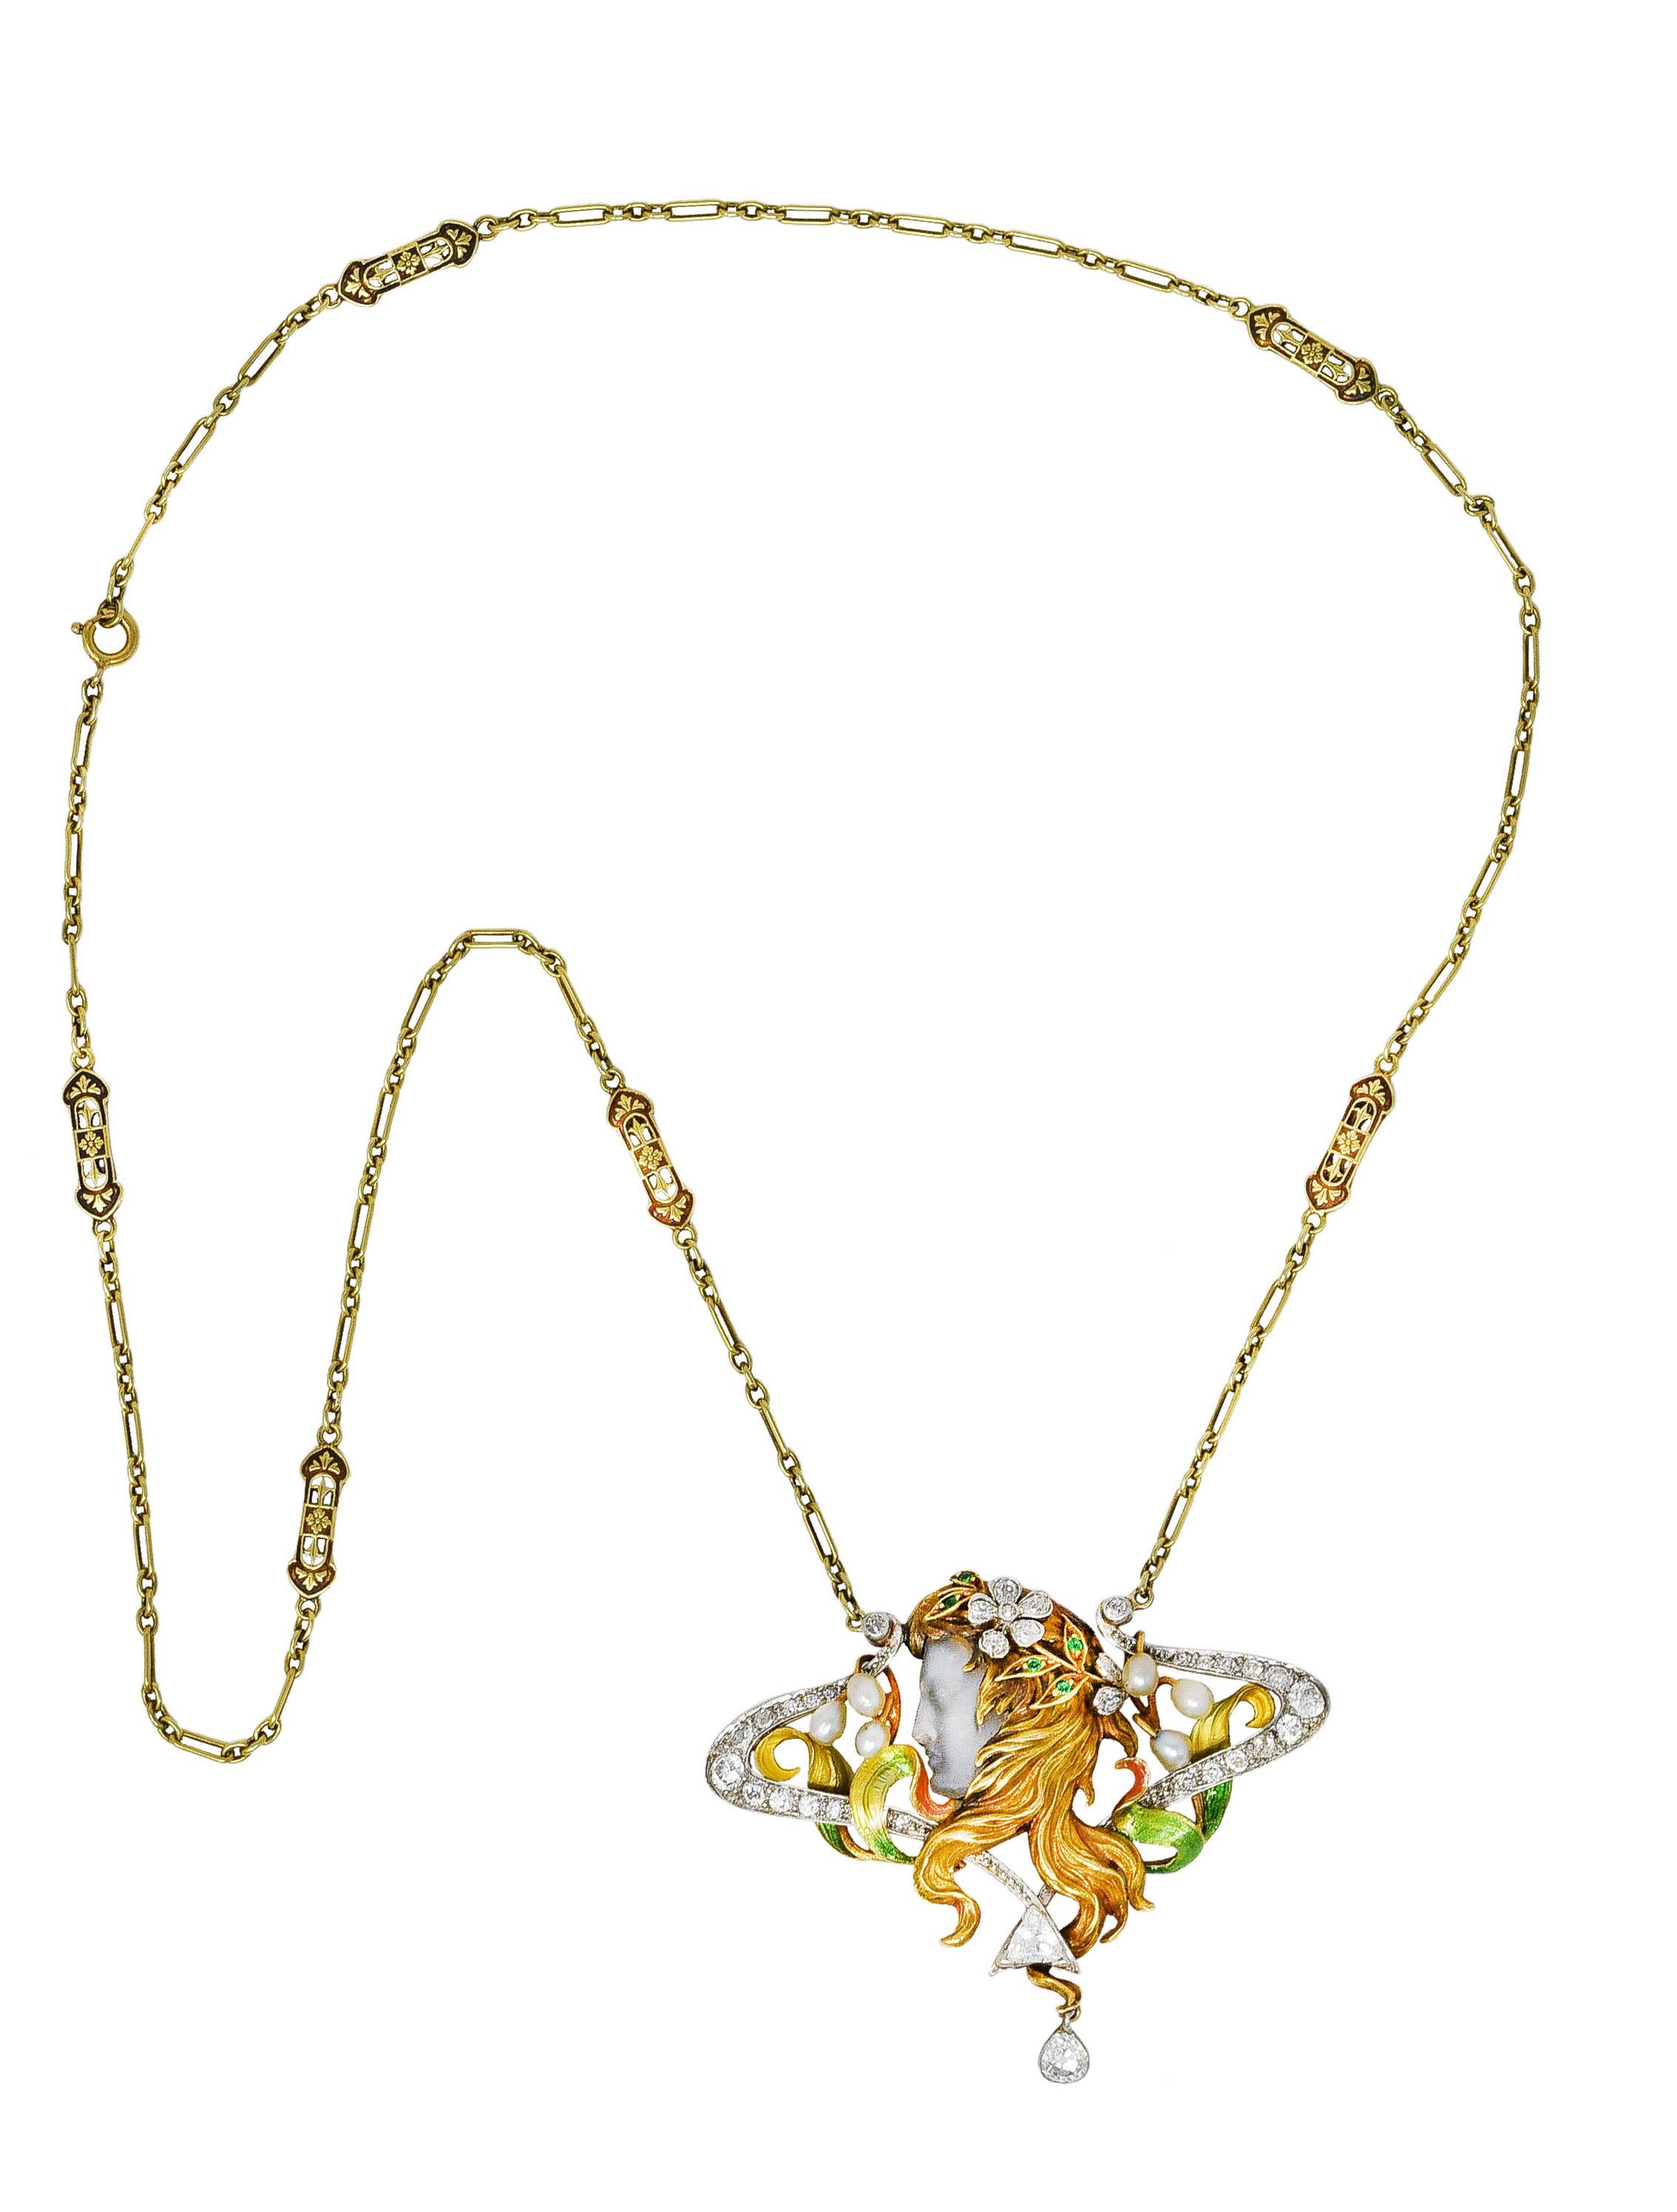 Necklace is comprised of a green gold link chain with stylized floral bar stations. Suspending a substantial whiplashed enhancer pendant via two 14 karat gold spring ring clasps. Pendant depicts a woman with texturous gold hair and scrolling